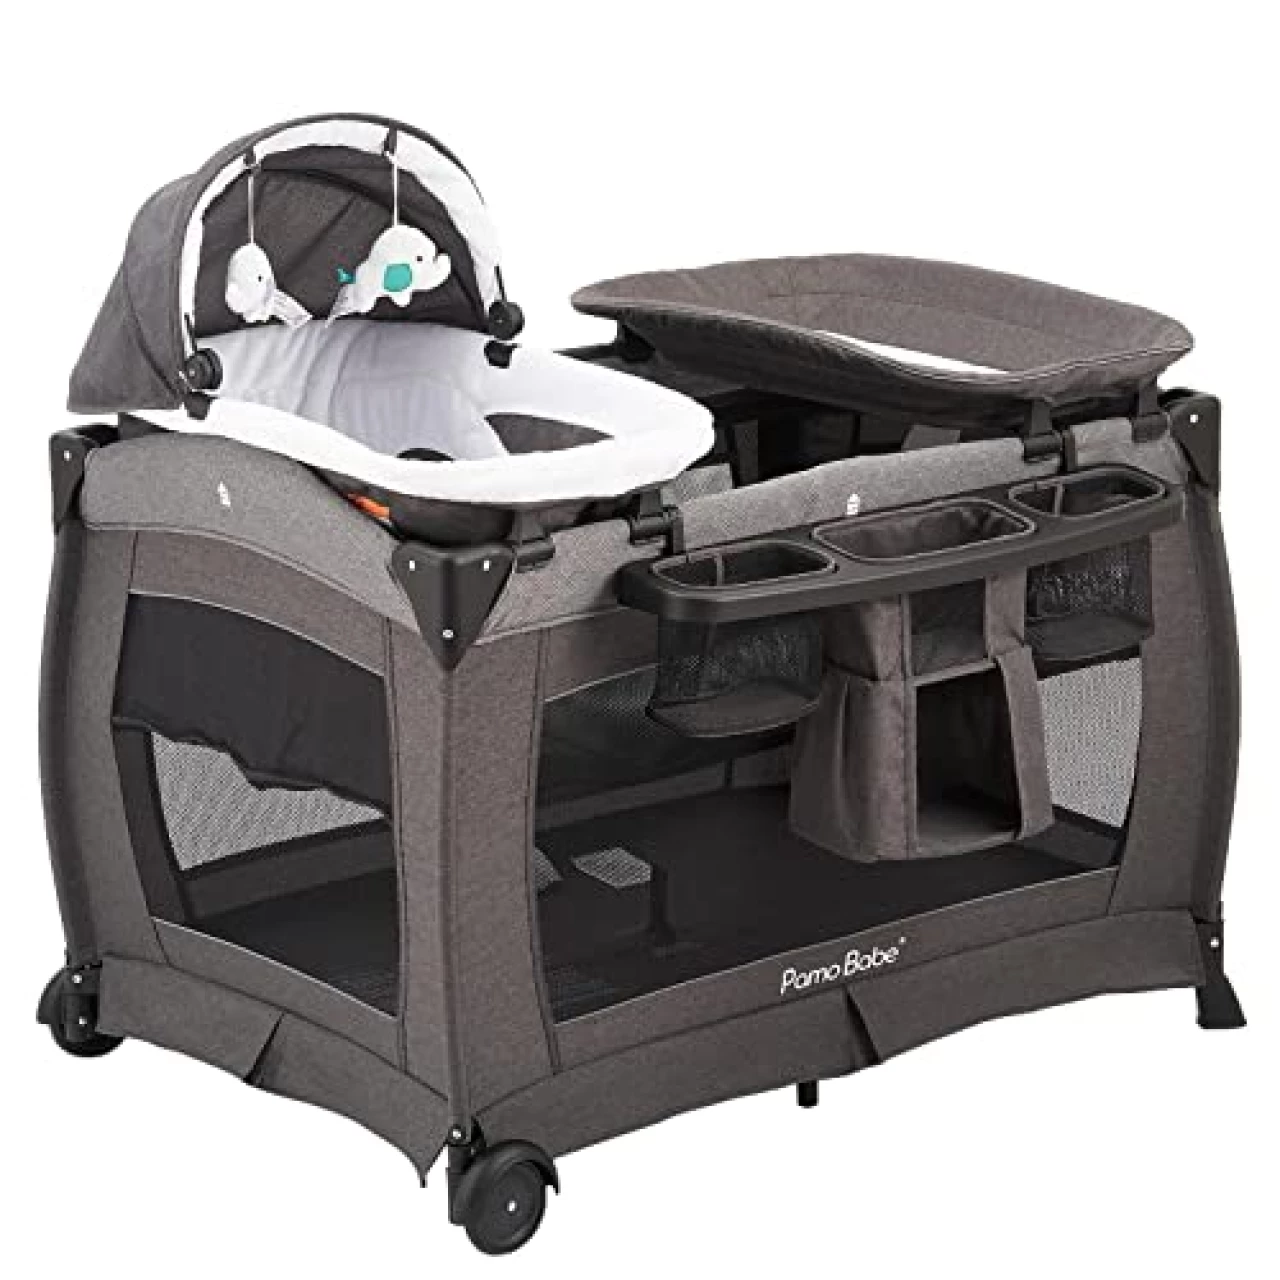 Pamo Babe Deluxe Nursery Center, Foldable Playard for Baby &amp; Toddler, Bassinet, Mattress, Changing Table for Newborn(Black)